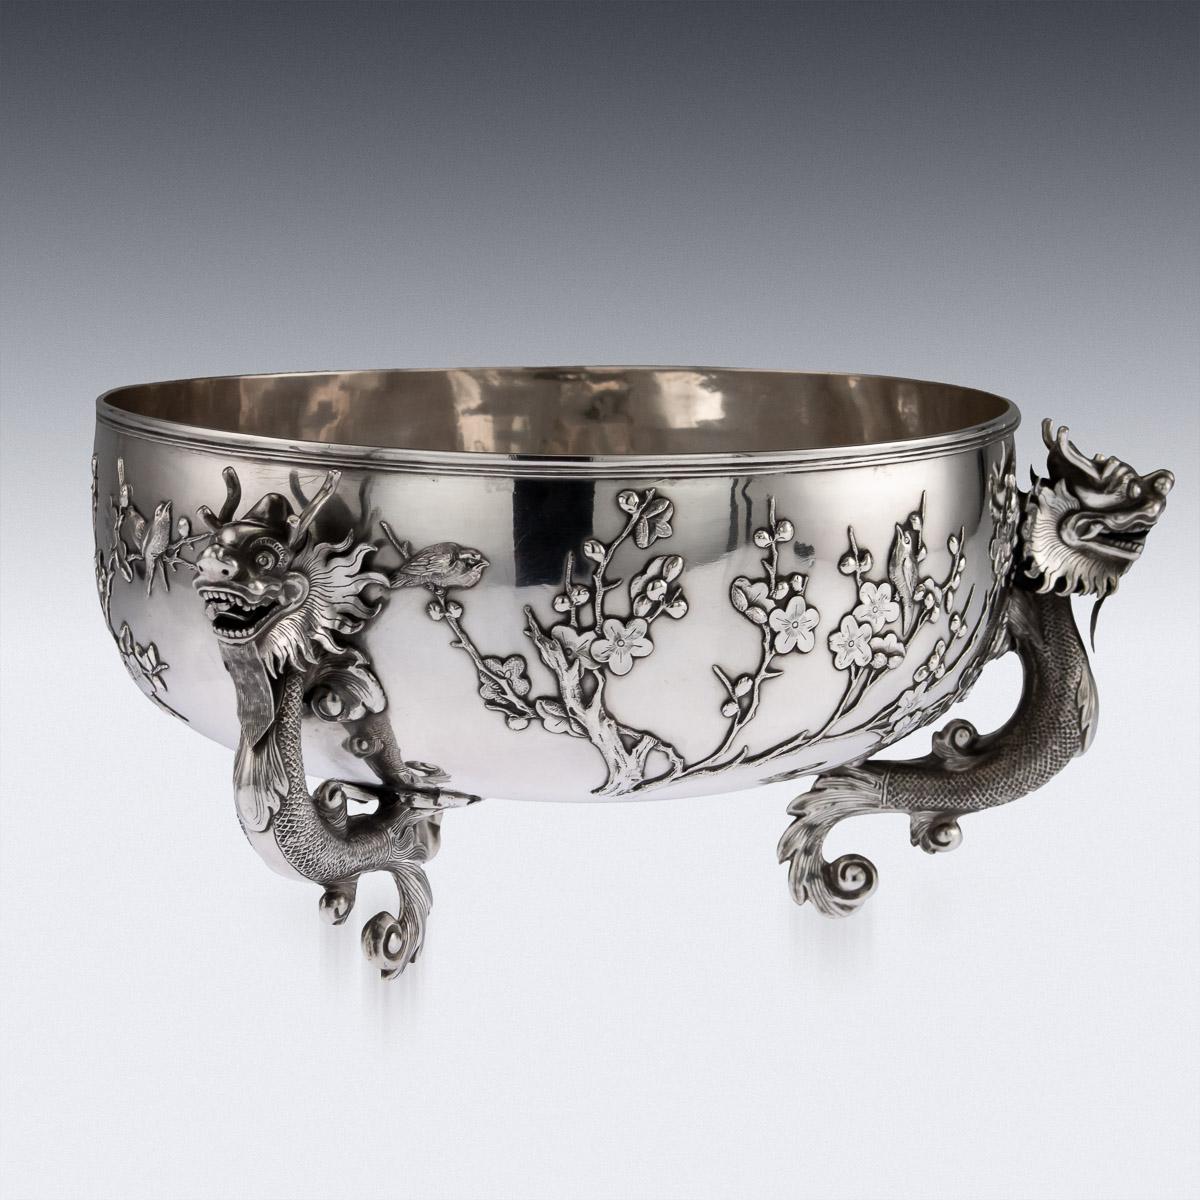 Antique late 19th century Chinese solid silver decorative dragon bowl, of round form with a deeded rim, plain ground applied, depicting birds flying and perched on blossoming cherry trees, supported by three mythical dragons. The bowl is